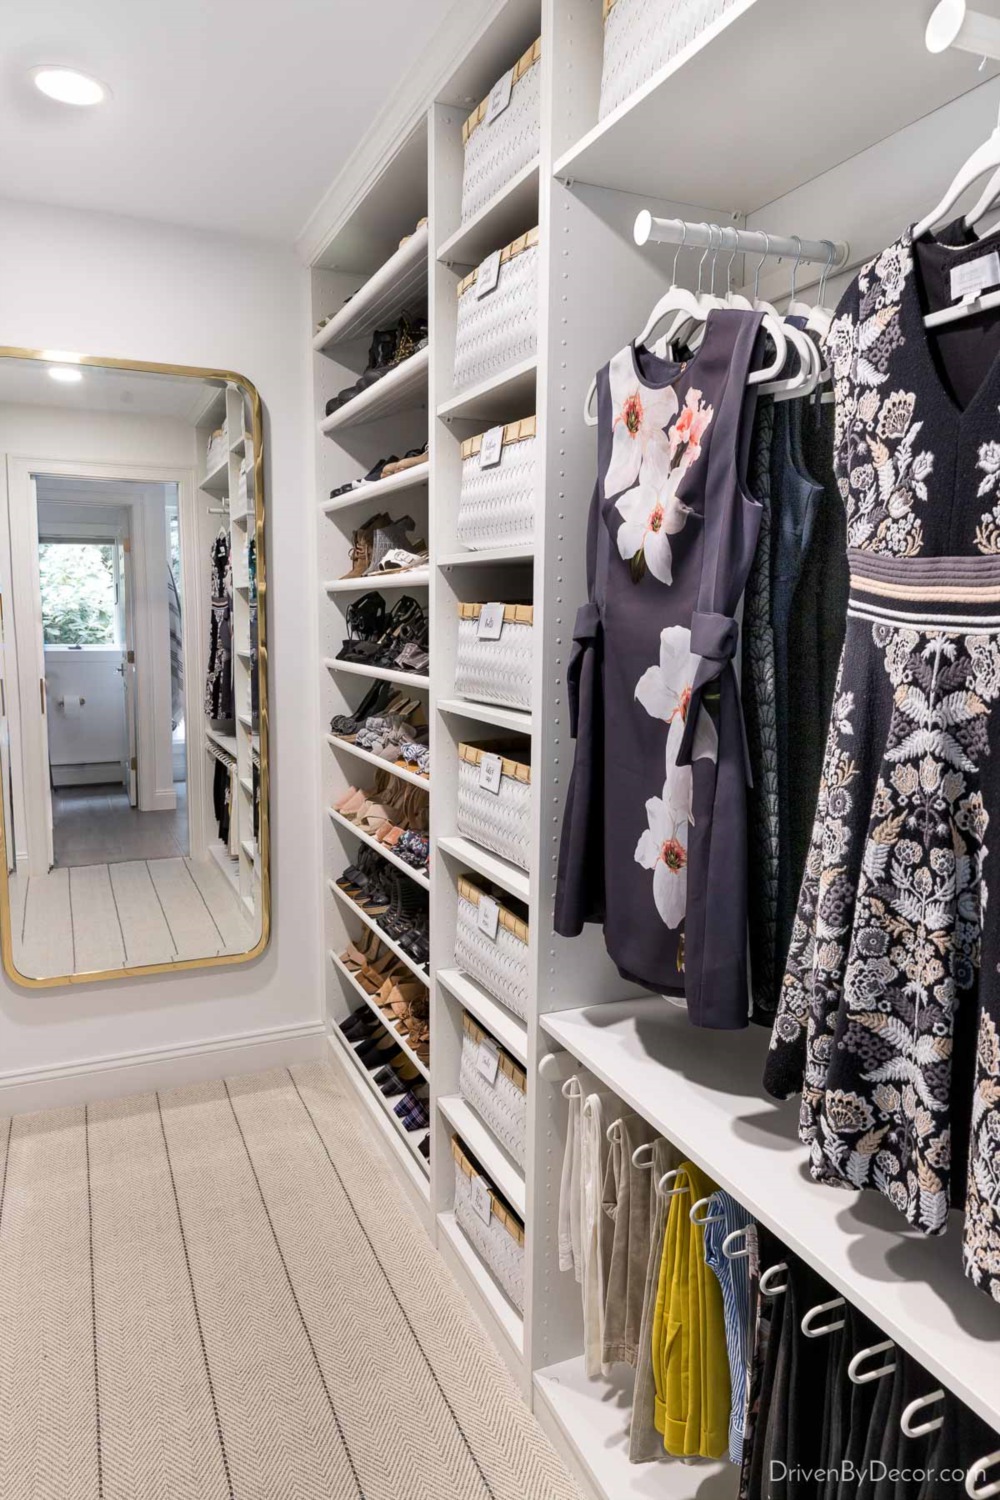 15 Closet Organization Ideas for Whipping Your Closet Into Shape!